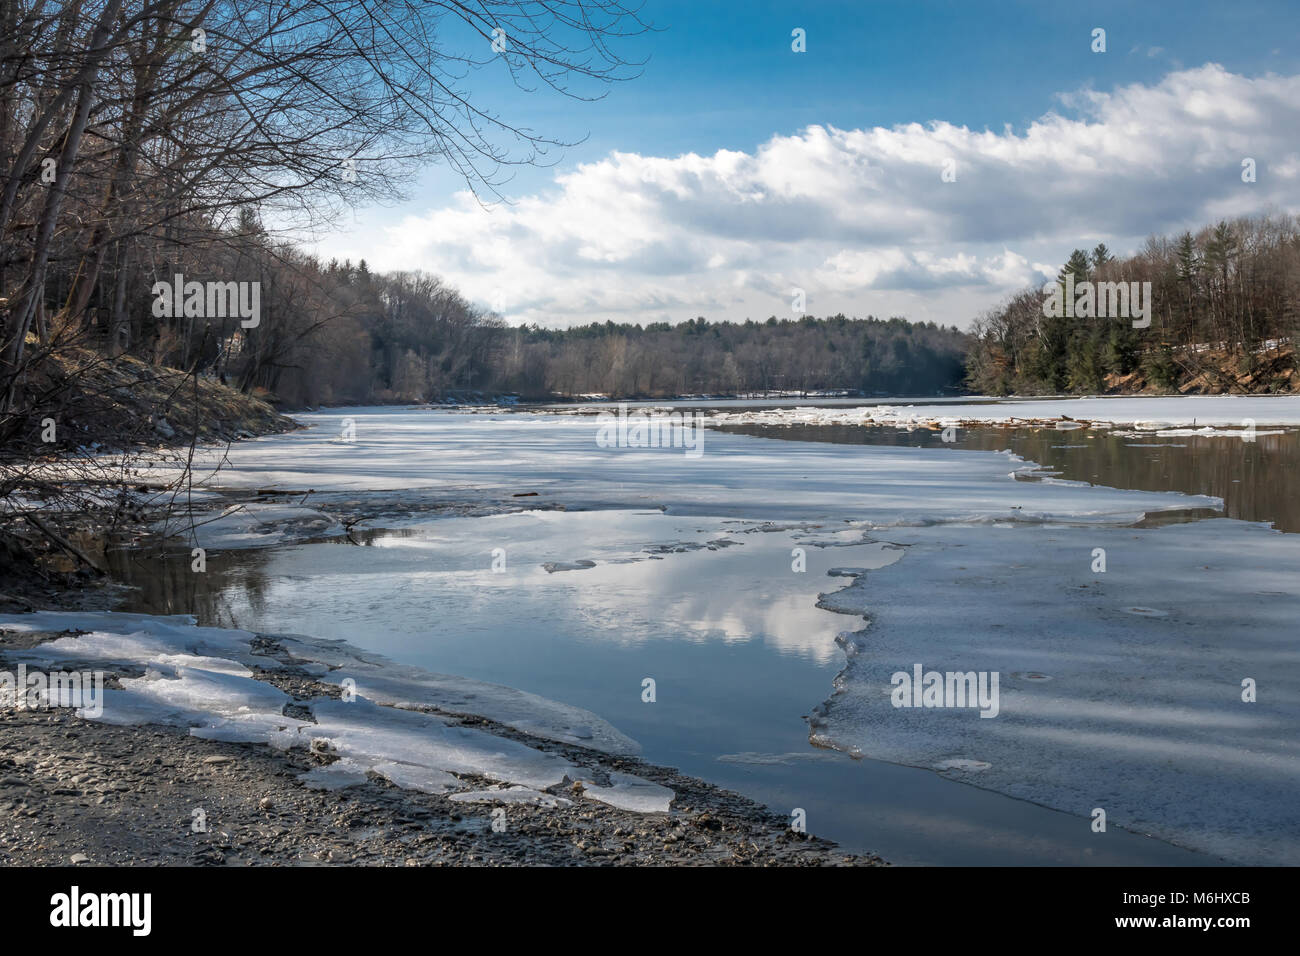 Winter’s heading out: Ice floes break up and flow south on the Connecticut River during a recent sunny late winter day in West Chesterfield, NH. Stock Photo